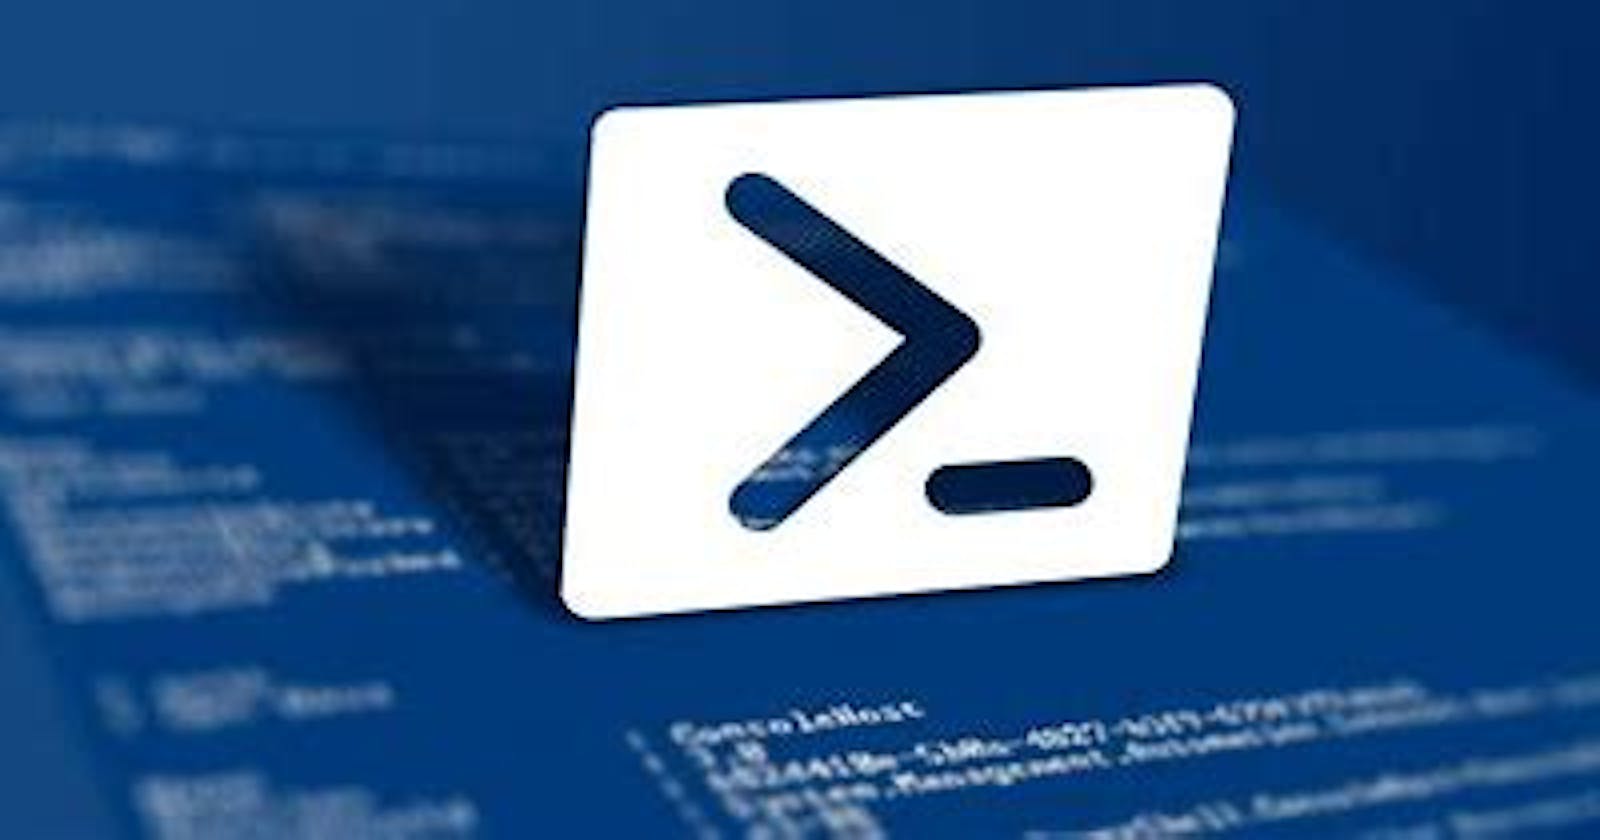 Getting started with PowerShell